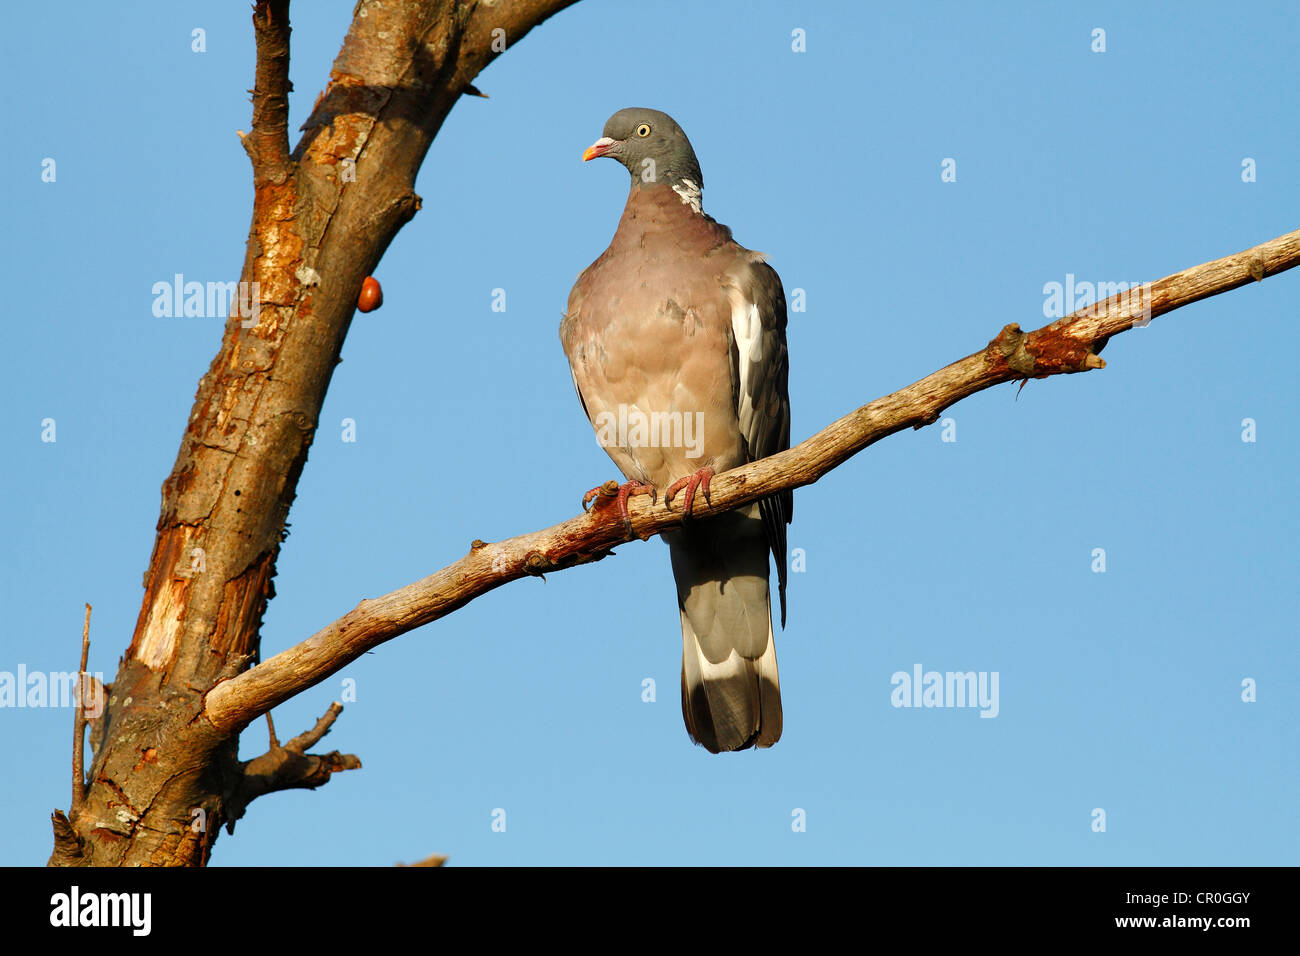 Common Wood Pigeon (Columba palumbus) perched on a branch, Baltic Sea island of Fehmarn, Schleswig-Holstein, Germany, Europe Stock Photo